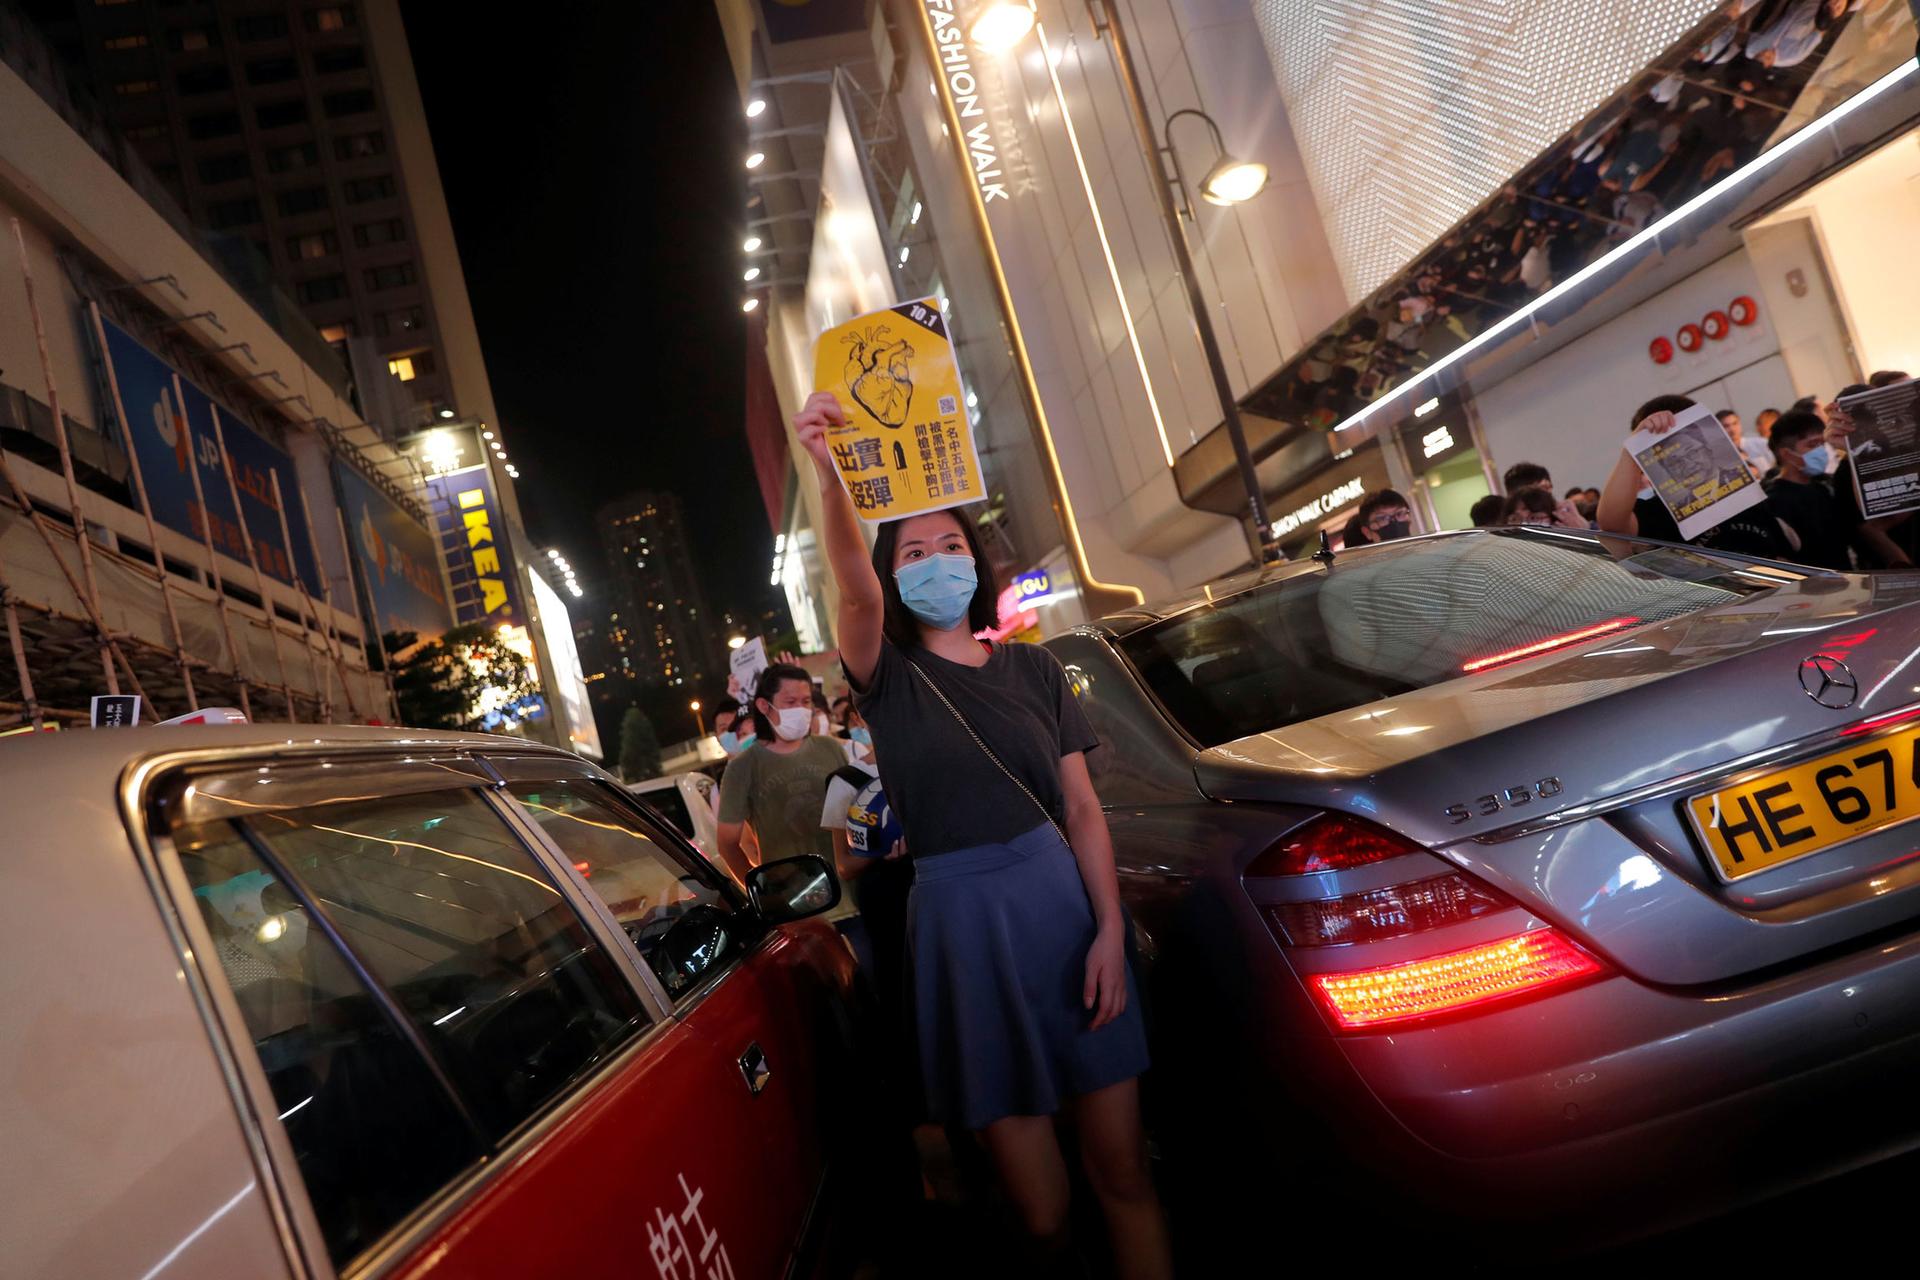 A woman is shown wearing a hospital mask and standing inbetween two cars.